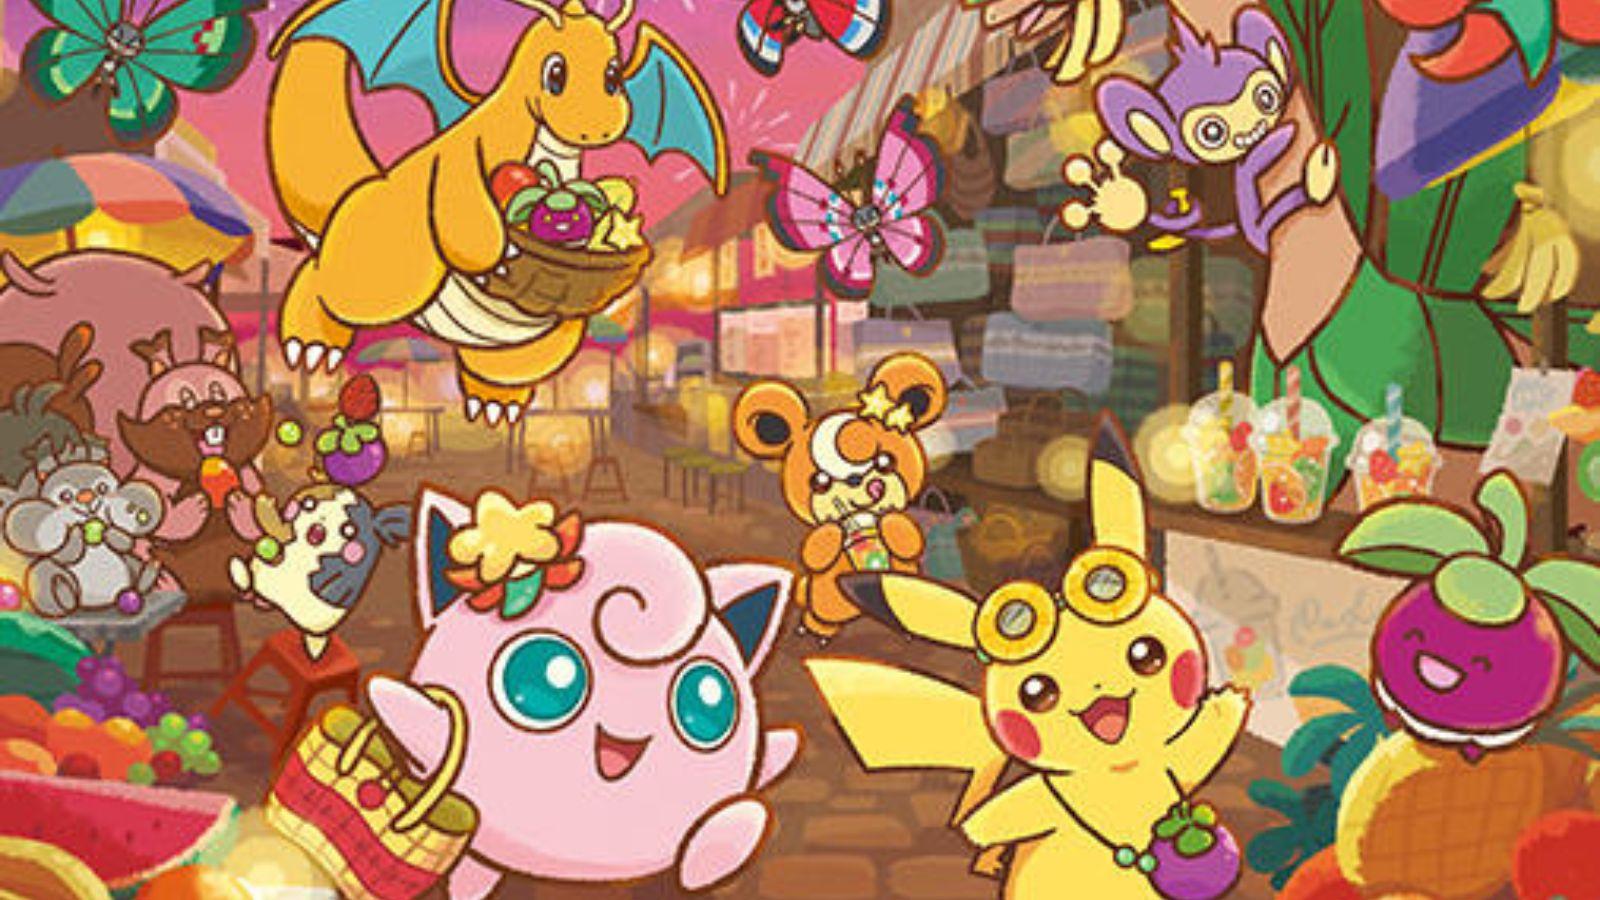 Pikachu with Mulberry bag promotional event banner with photos of Jigglypuff, Pikachu, Dragonite and friends playing in a decorative street.